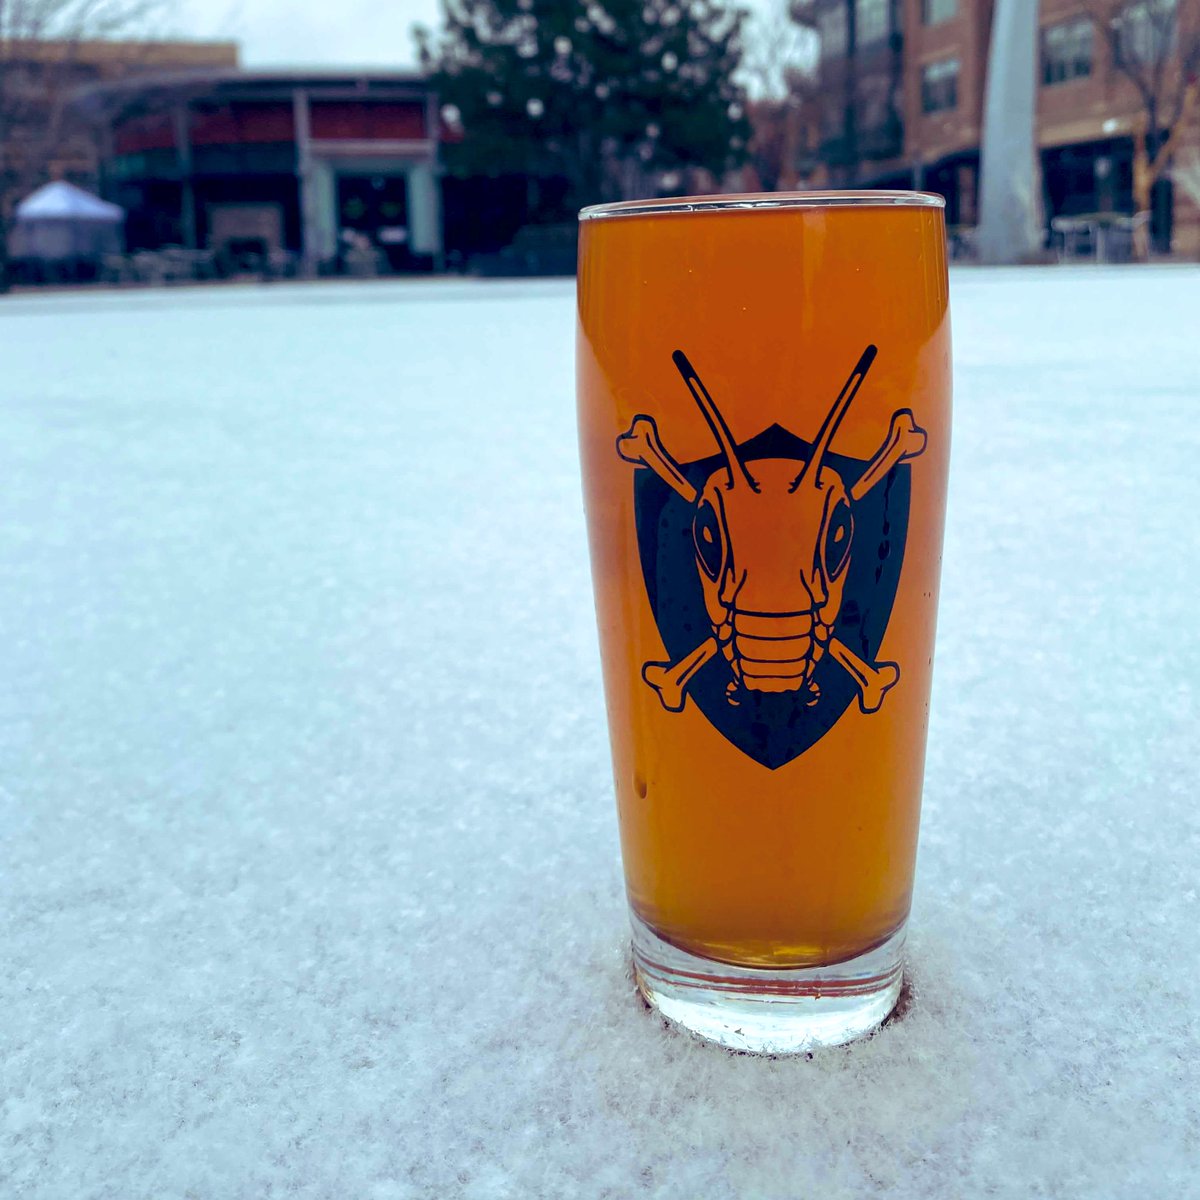 #NewOnTap: APRICOT HABANERO. This off-dry blend of #apples, #apricots & #habaneropeppers is juicy with lingering heat. Perfect to warm you up on a #snowyday! Rolling out in our taprooms this week, grab a pint, growler or grunt to go, or order online for pickup! 🍎 🍑 🌶 ❄️